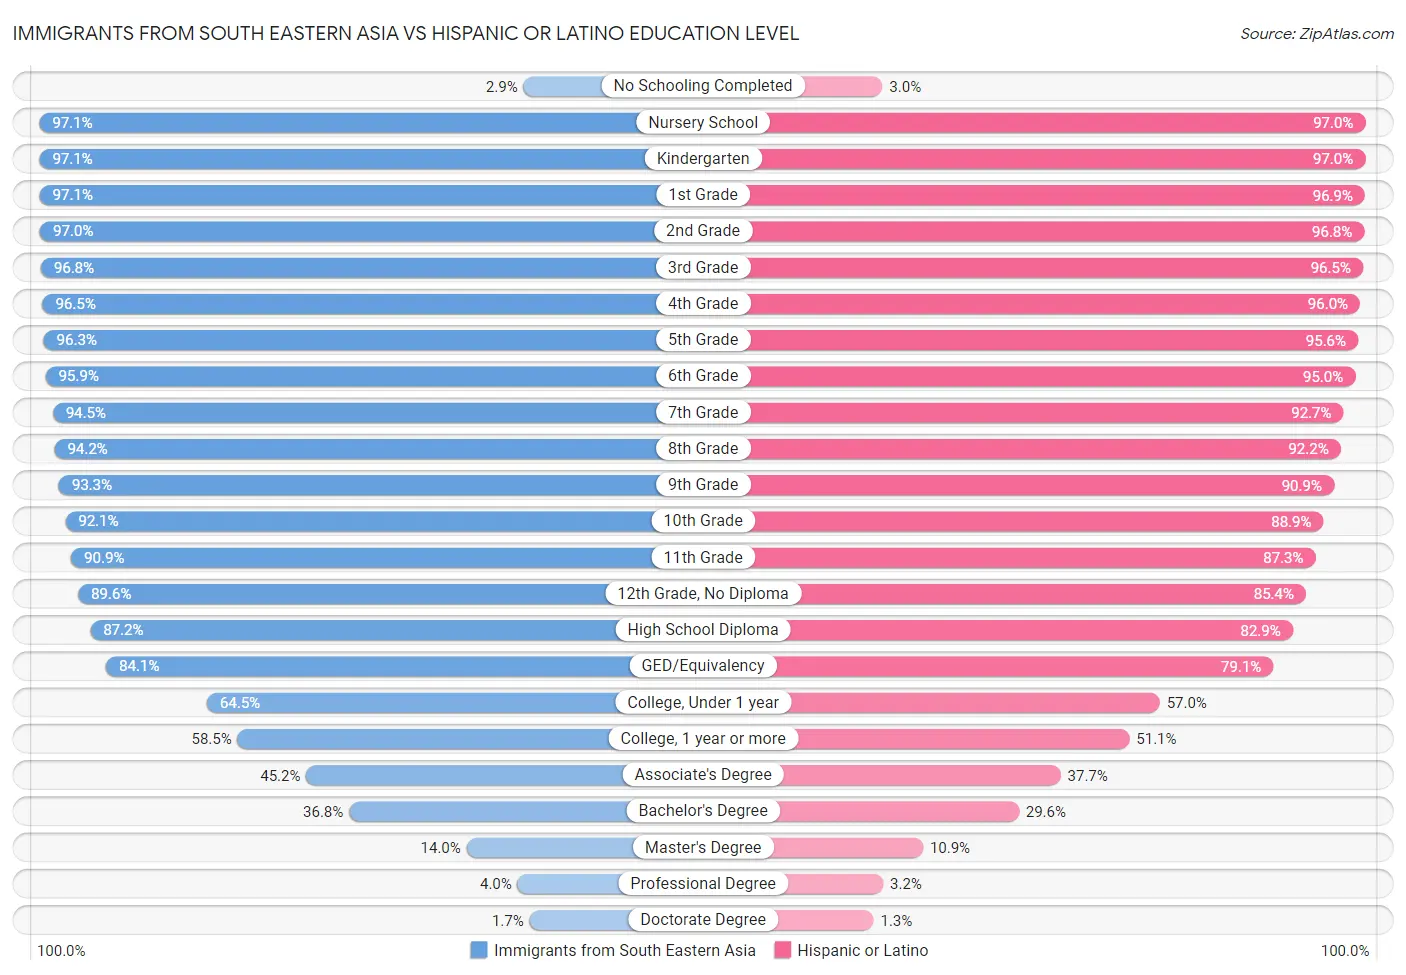 Immigrants from South Eastern Asia vs Hispanic or Latino Education Level